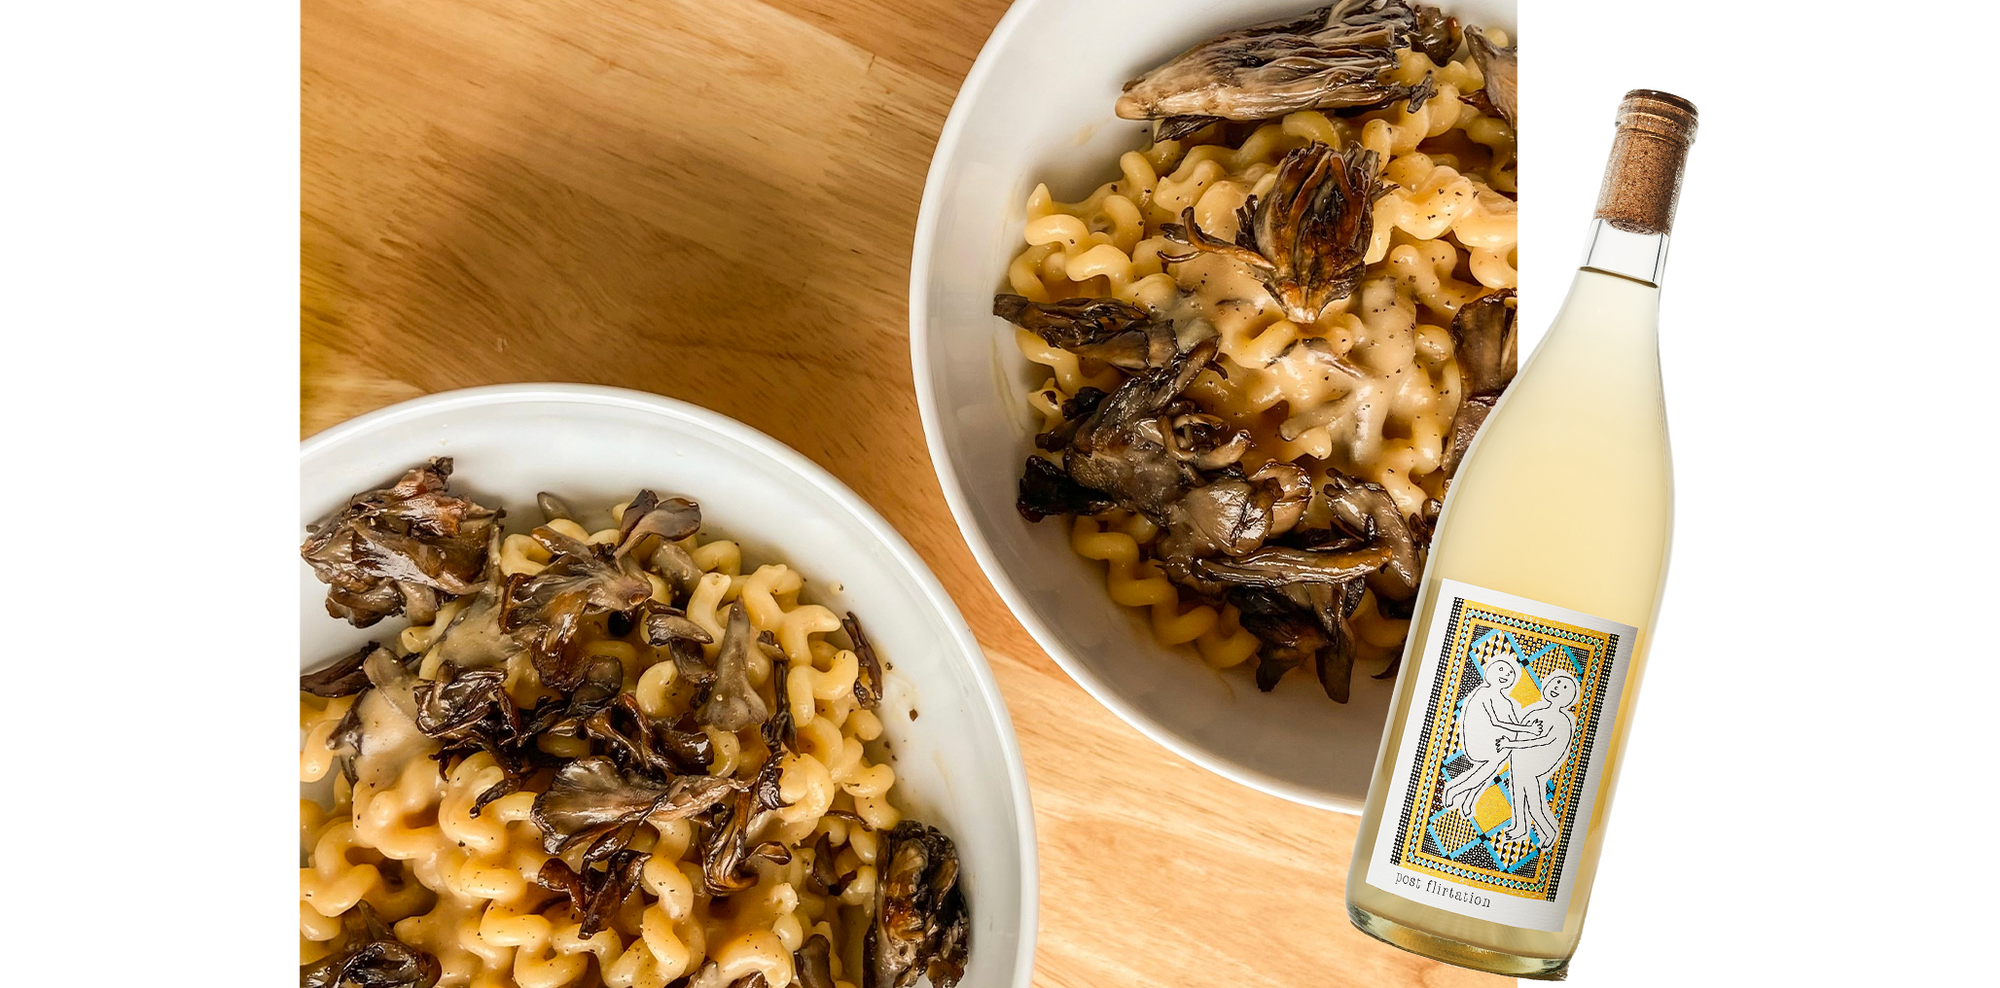 What's Cooking? Creamy Miso Pasta with Crispy Mushrooms